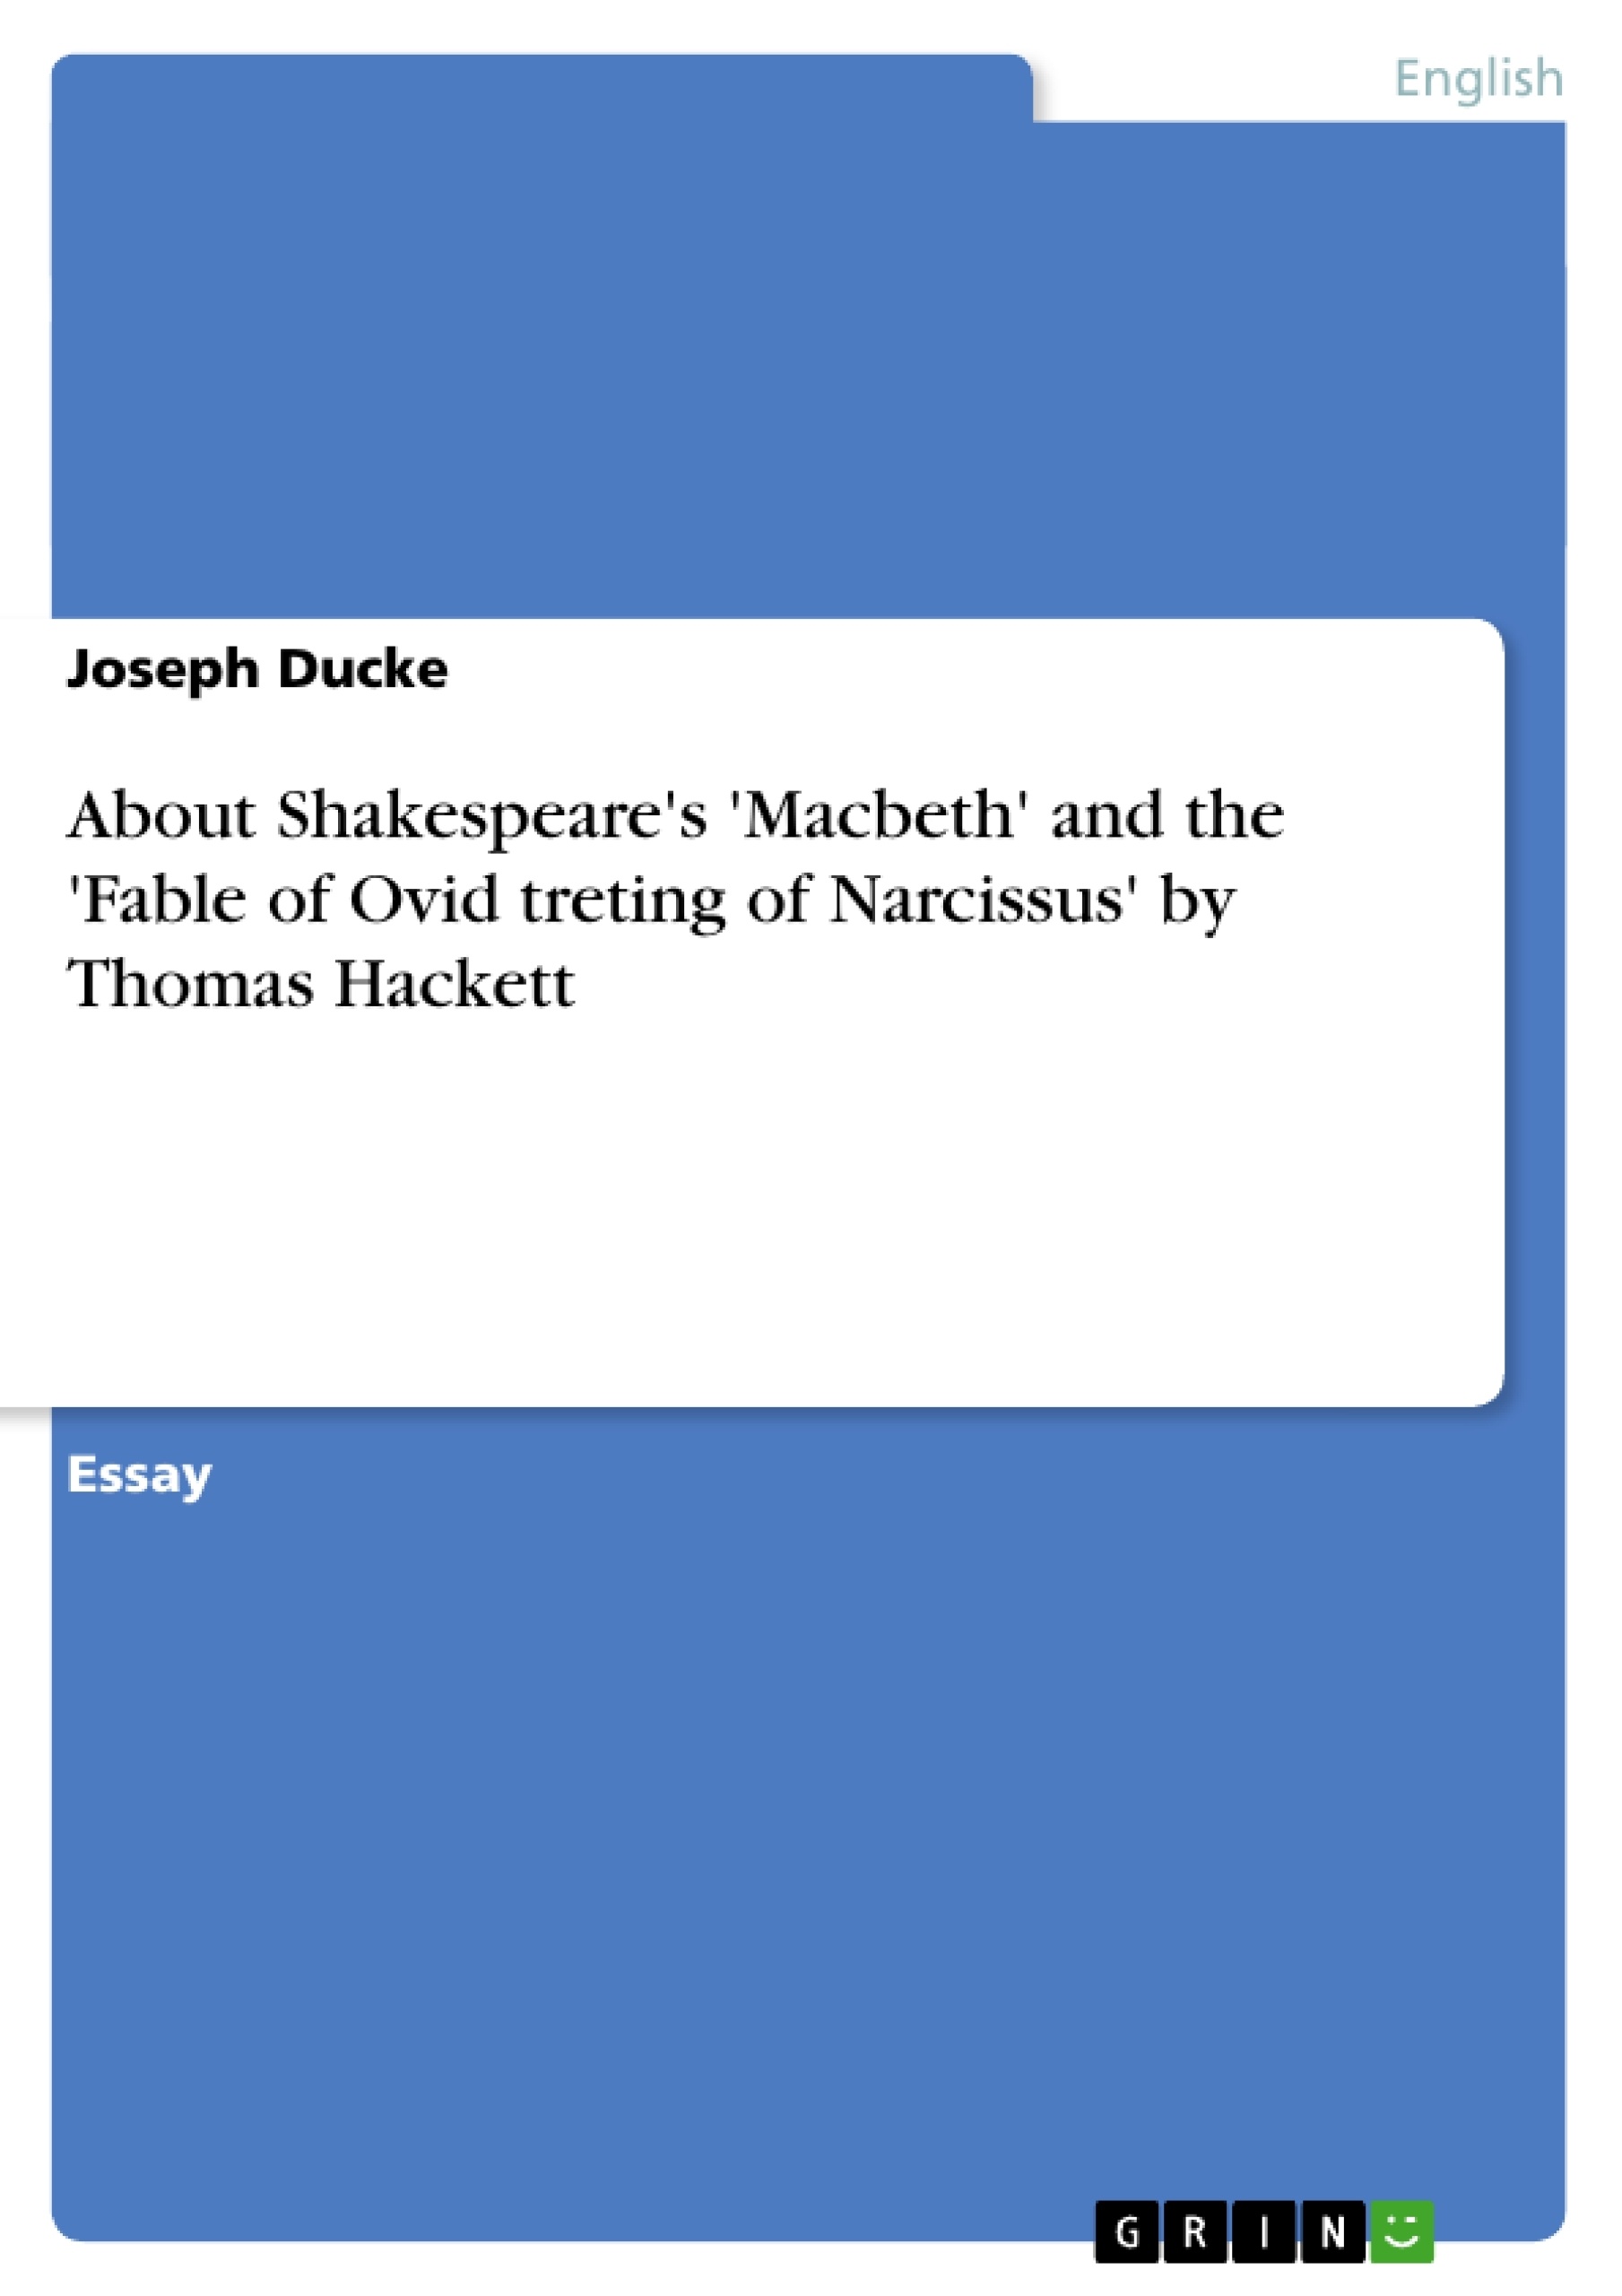 Title: About Shakespeare's 'Macbeth' and the 'Fable of Ovid treting of Narcissus' by Thomas Hackett